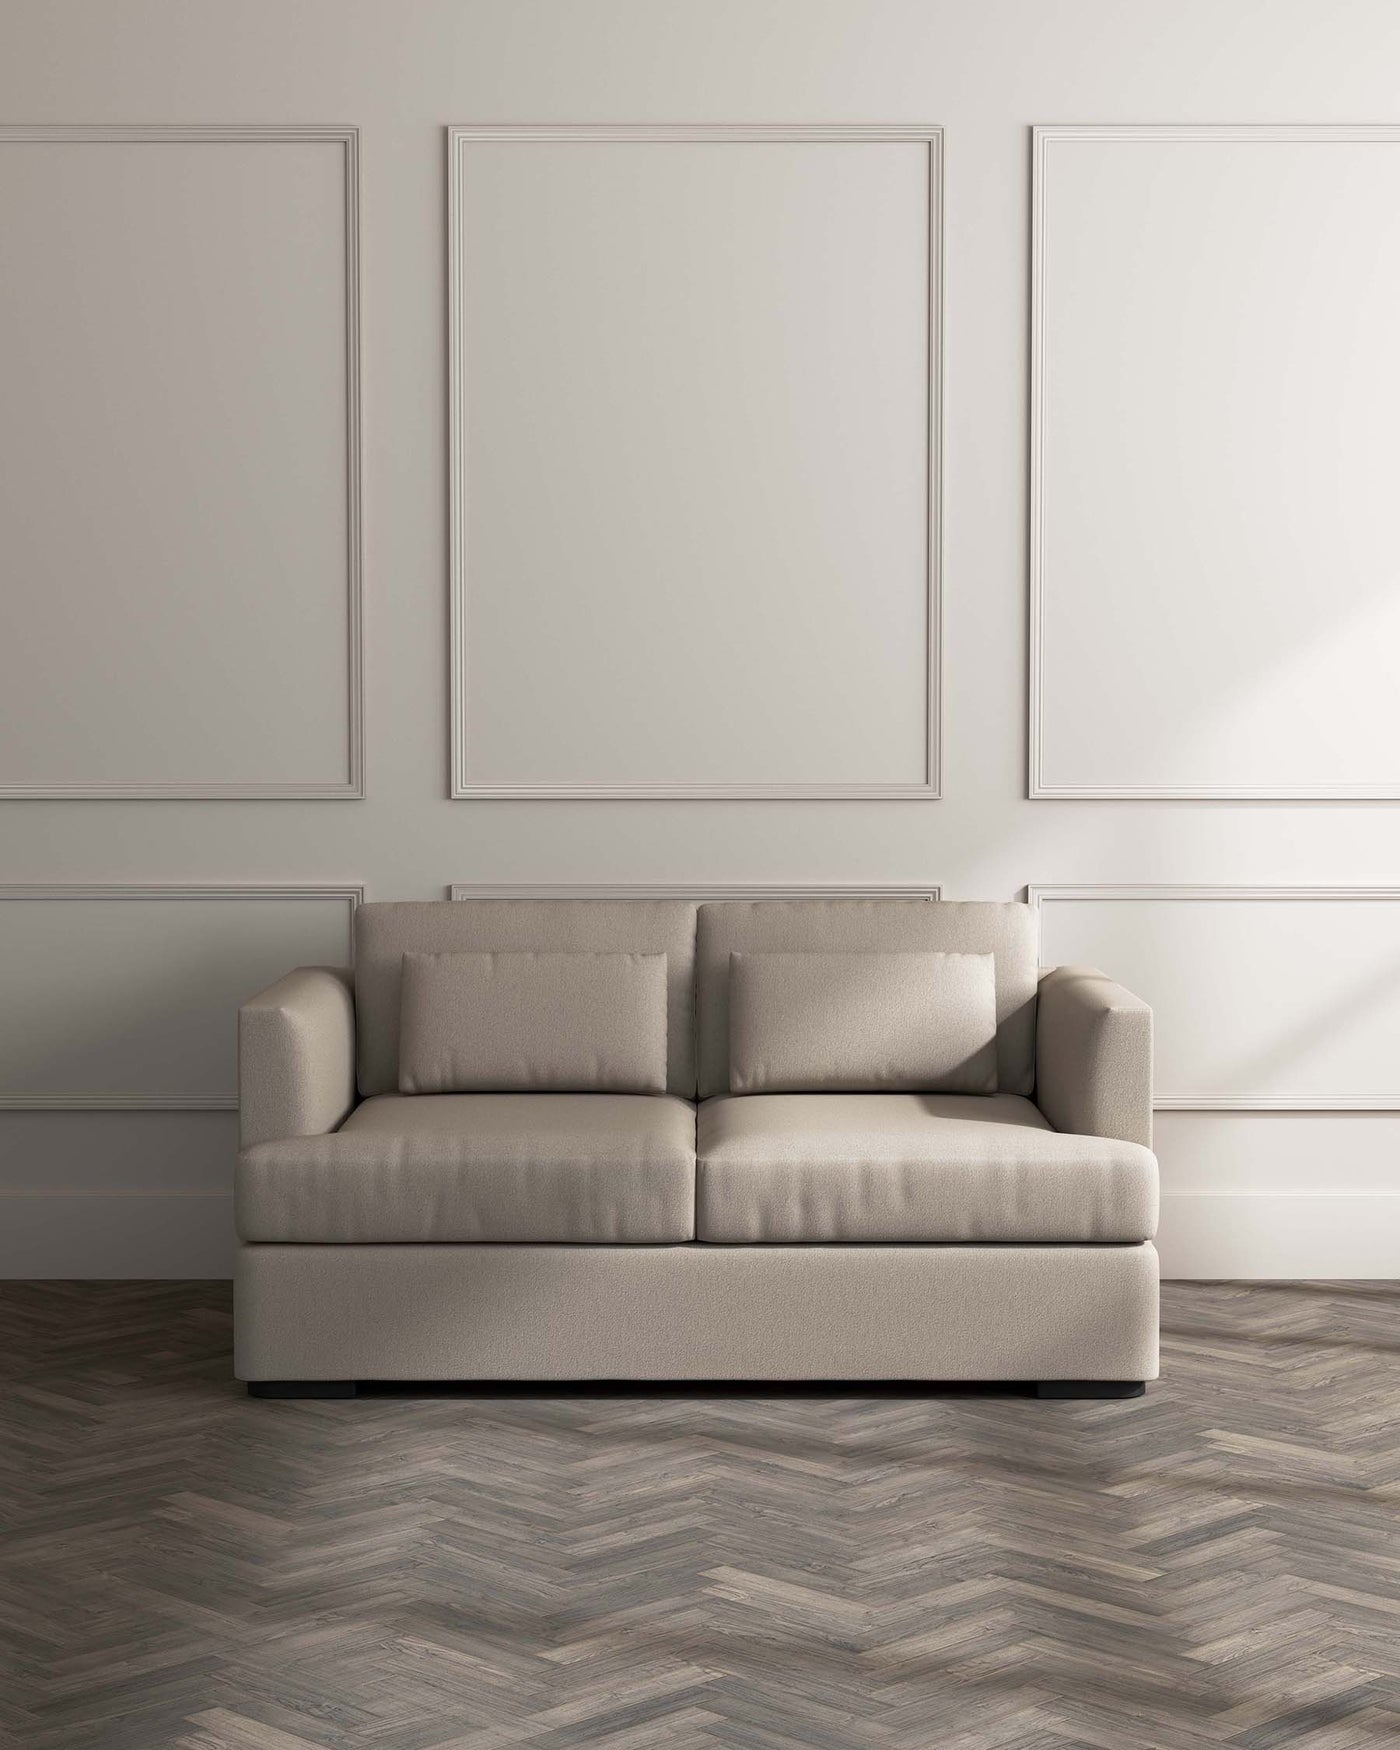 Contemporary three-seater upholstered sofa in a neutral beige tone with clean lines and minimalistic square armrests, positioned on a herringbone-patterned wooden floor with two empty frames on the wall above.